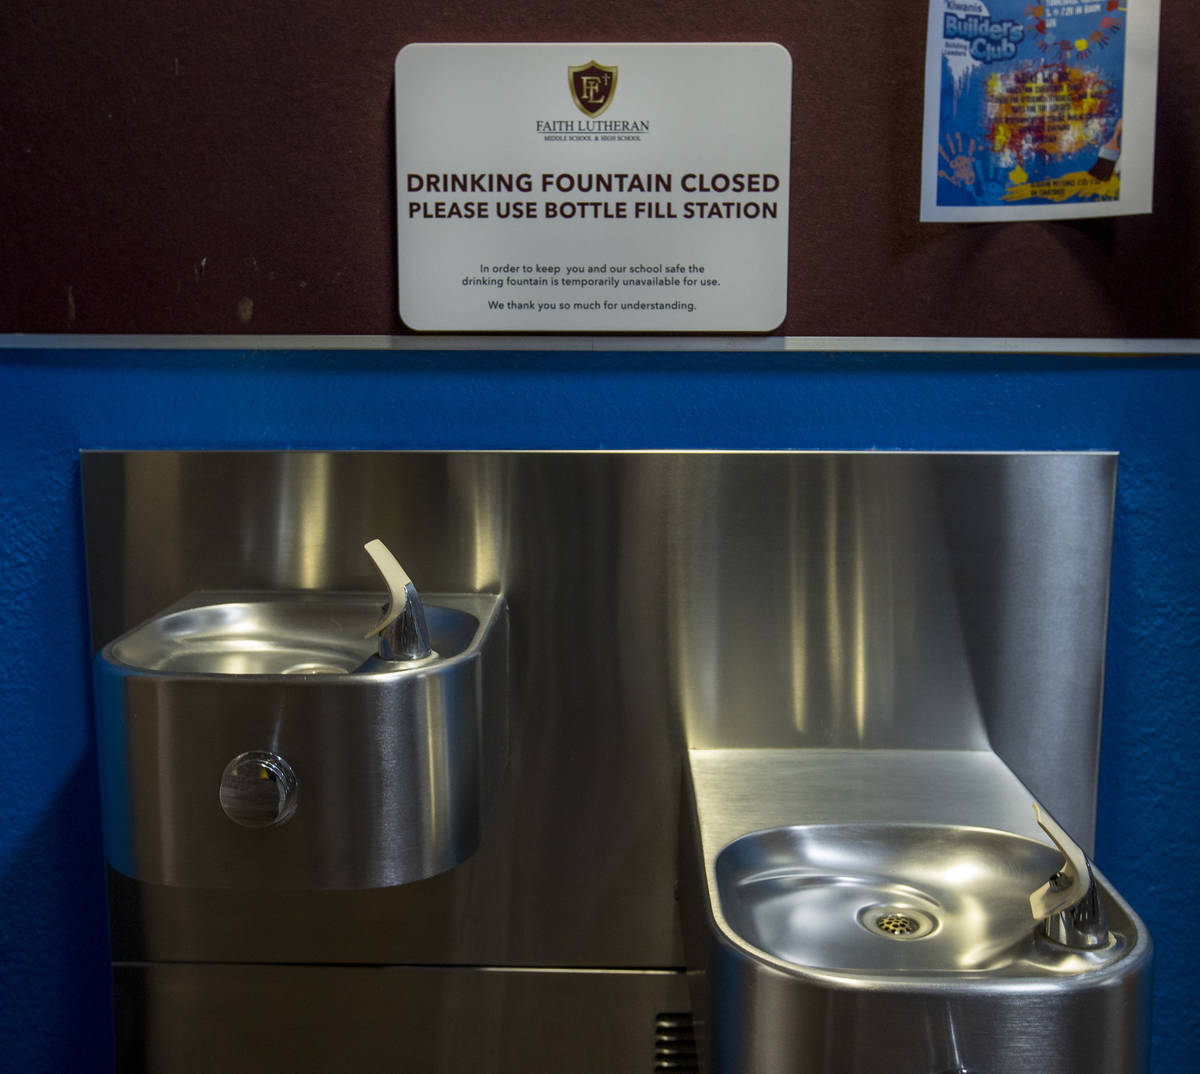 Drinking fountains are closed due to COVID-19 safety measures at Faith Lutheran Middle & Hi ...